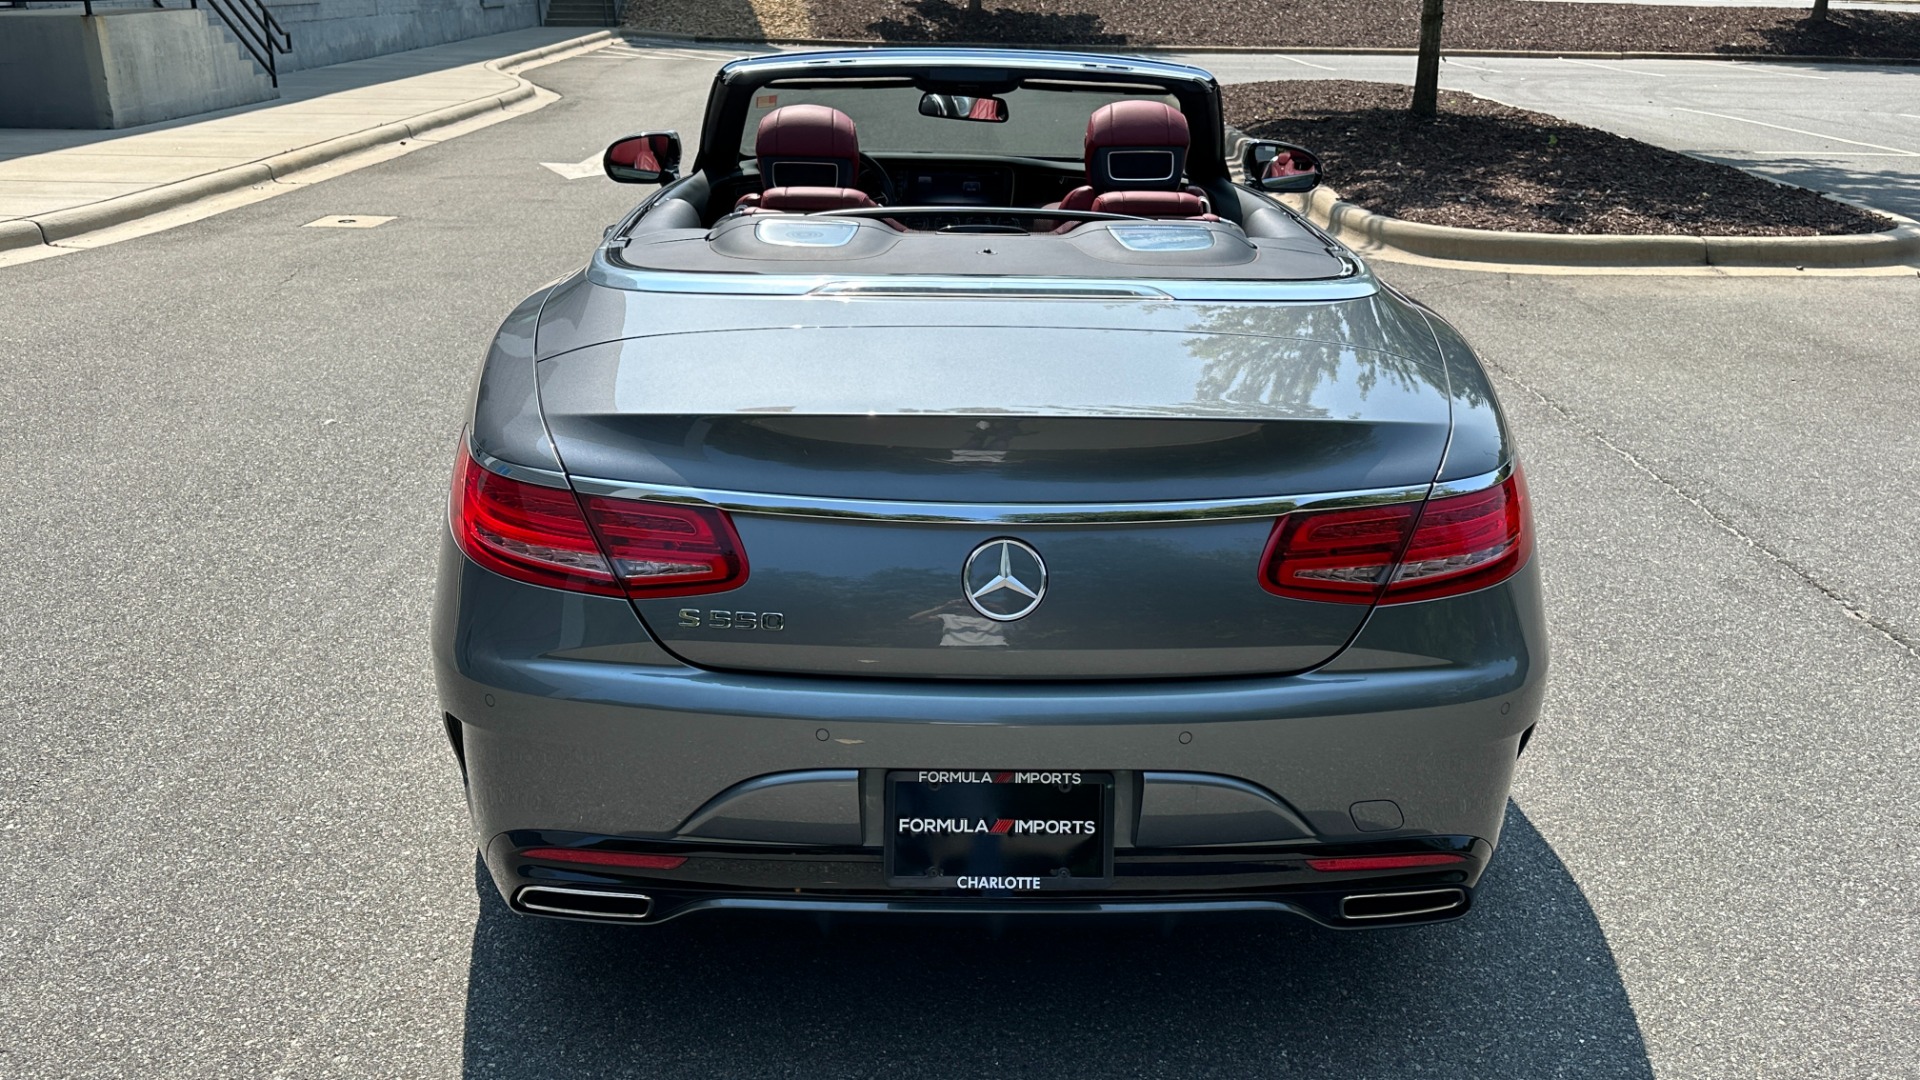 Used 2017 Mercedes-Benz S-Class S 550 CABRIOLET / LOADED OPTIONS / DESIGNO INTERIOR / SPORT / PREMIUM / MOR for sale Sold at Formula Imports in Charlotte NC 28227 11